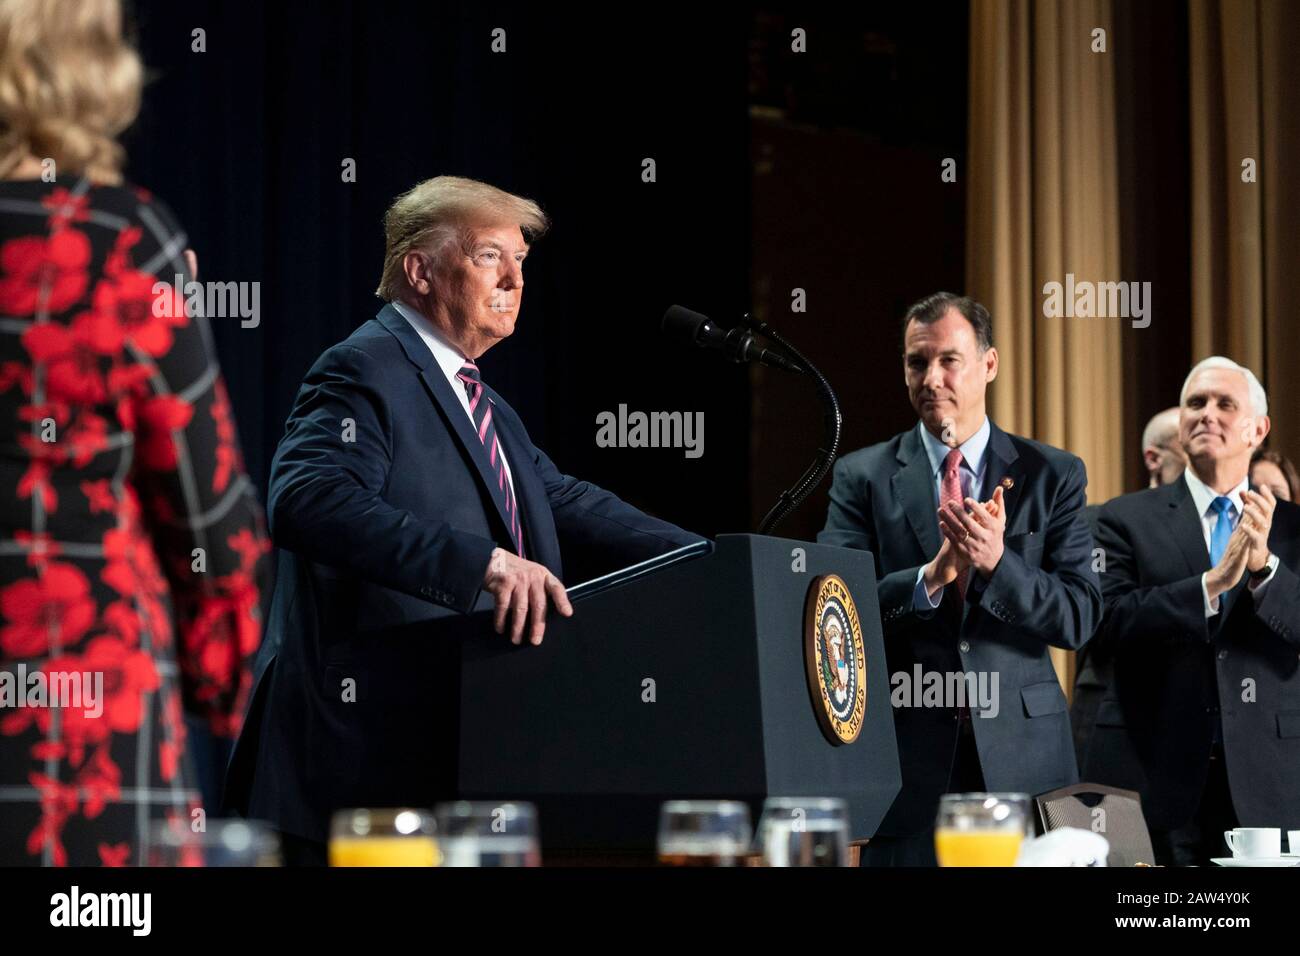 Washington, United States Of America. 06th Feb, 2020. Washington, United States of America. 06 February, 2020. U.S President Donald Trump delivers remarks at the 2020 National Prayer Breakfast at the Washington Hilton February 6, 2020 in Washington, DC Trump used the normally bipartisan event to savage his opponents calling them vicious and mean following his Senate acquittal in the impeachment trial. Credit: Joyce Boghosian/White House Photo/Alamy Live News Stock Photo